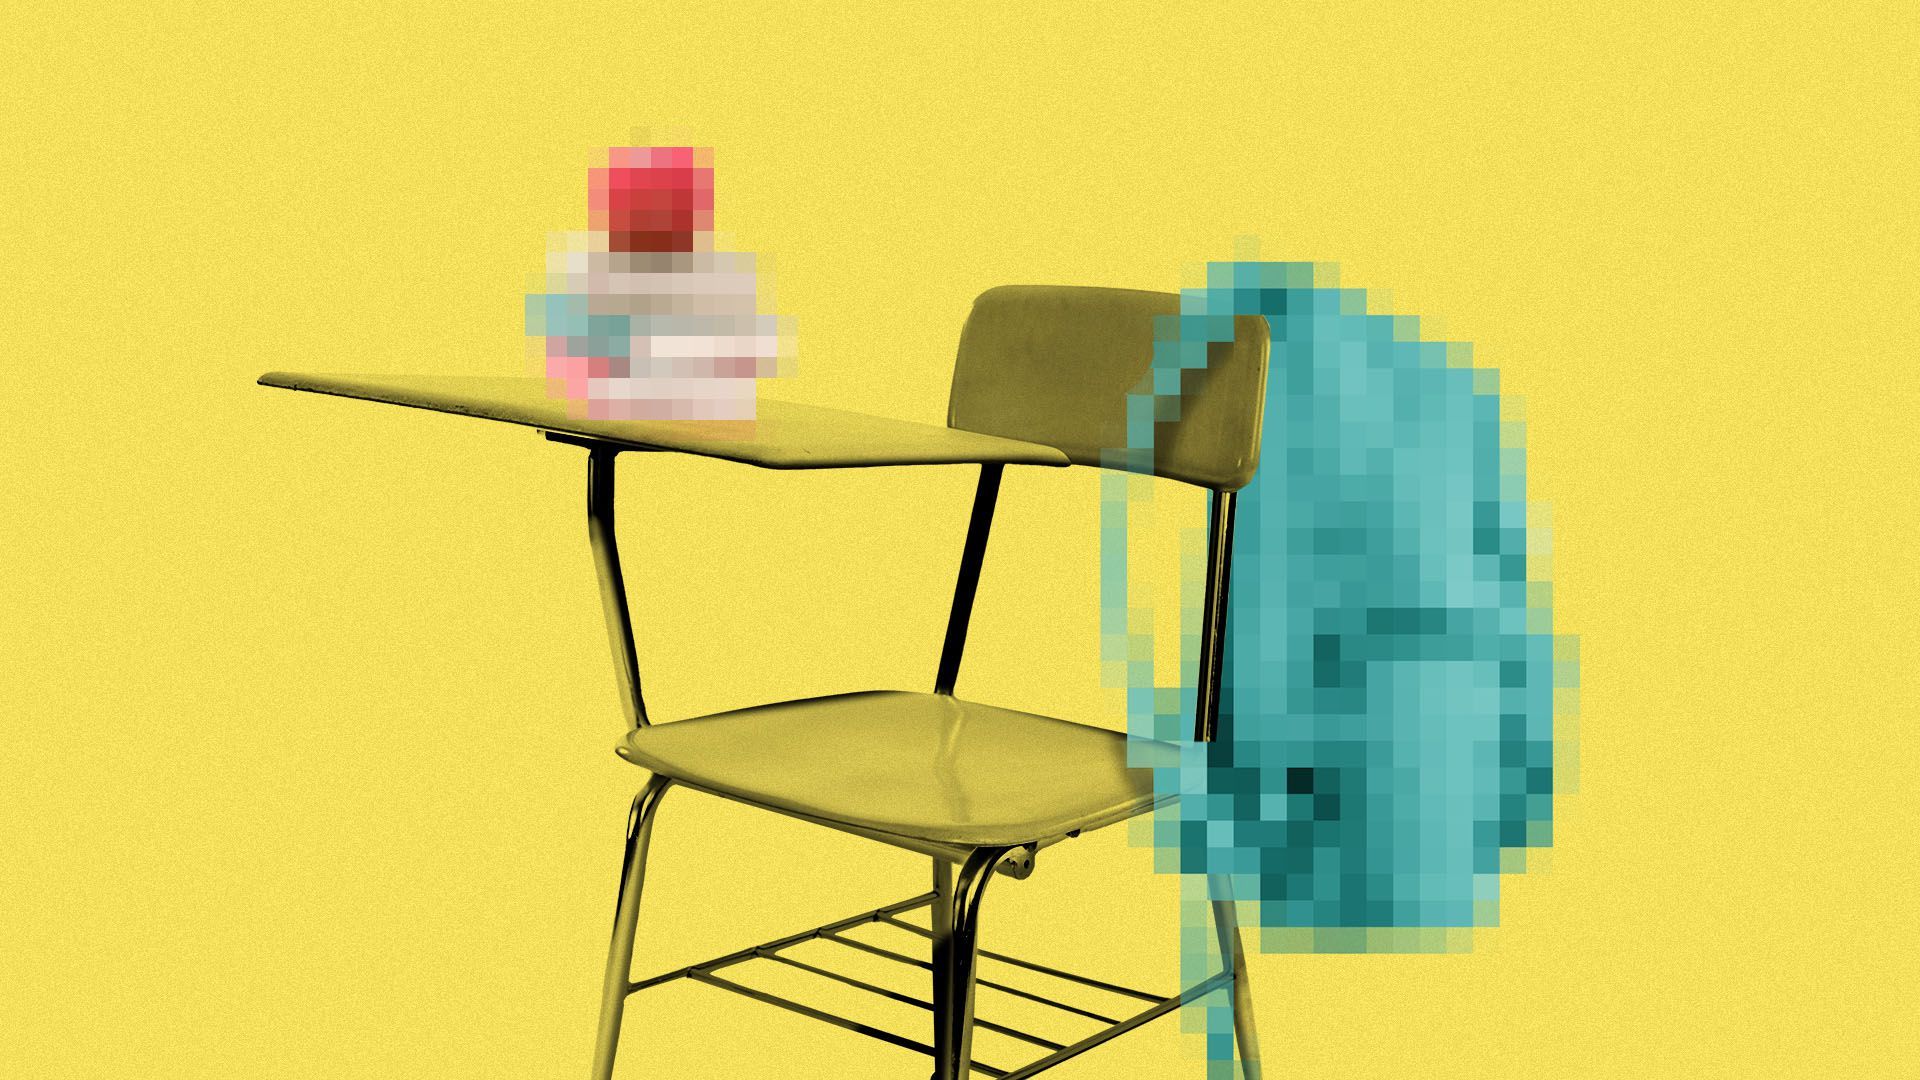 Illustration of a school desk with a pixelated backpack and stack of books and apple